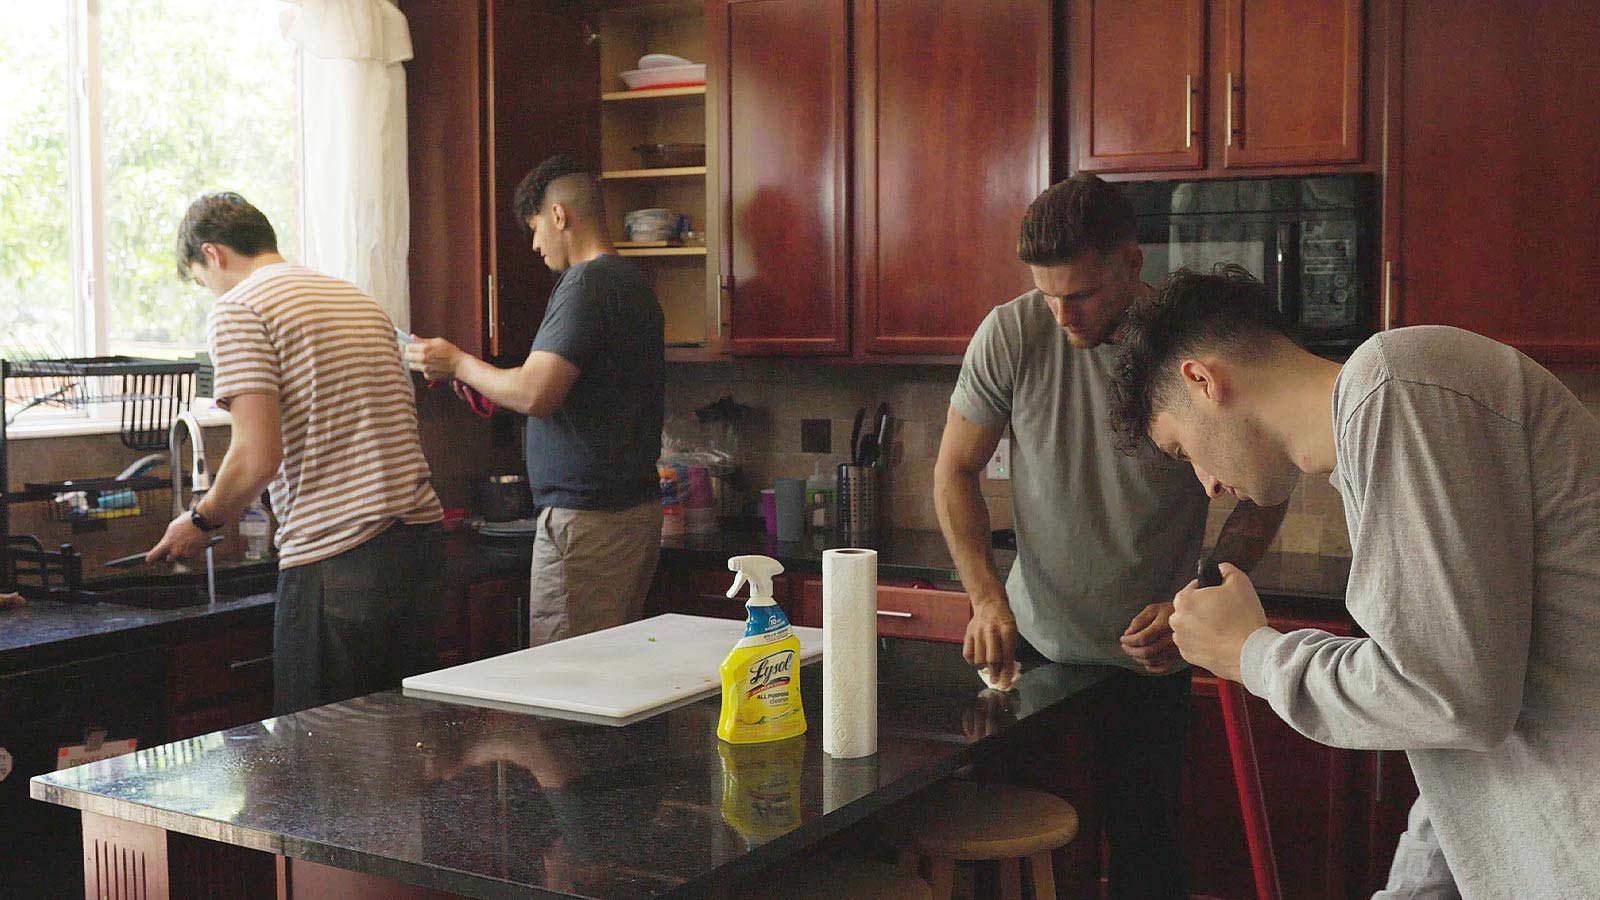 Several men participating in a kitchen cleanup, wiping down countertops and washing dishes.